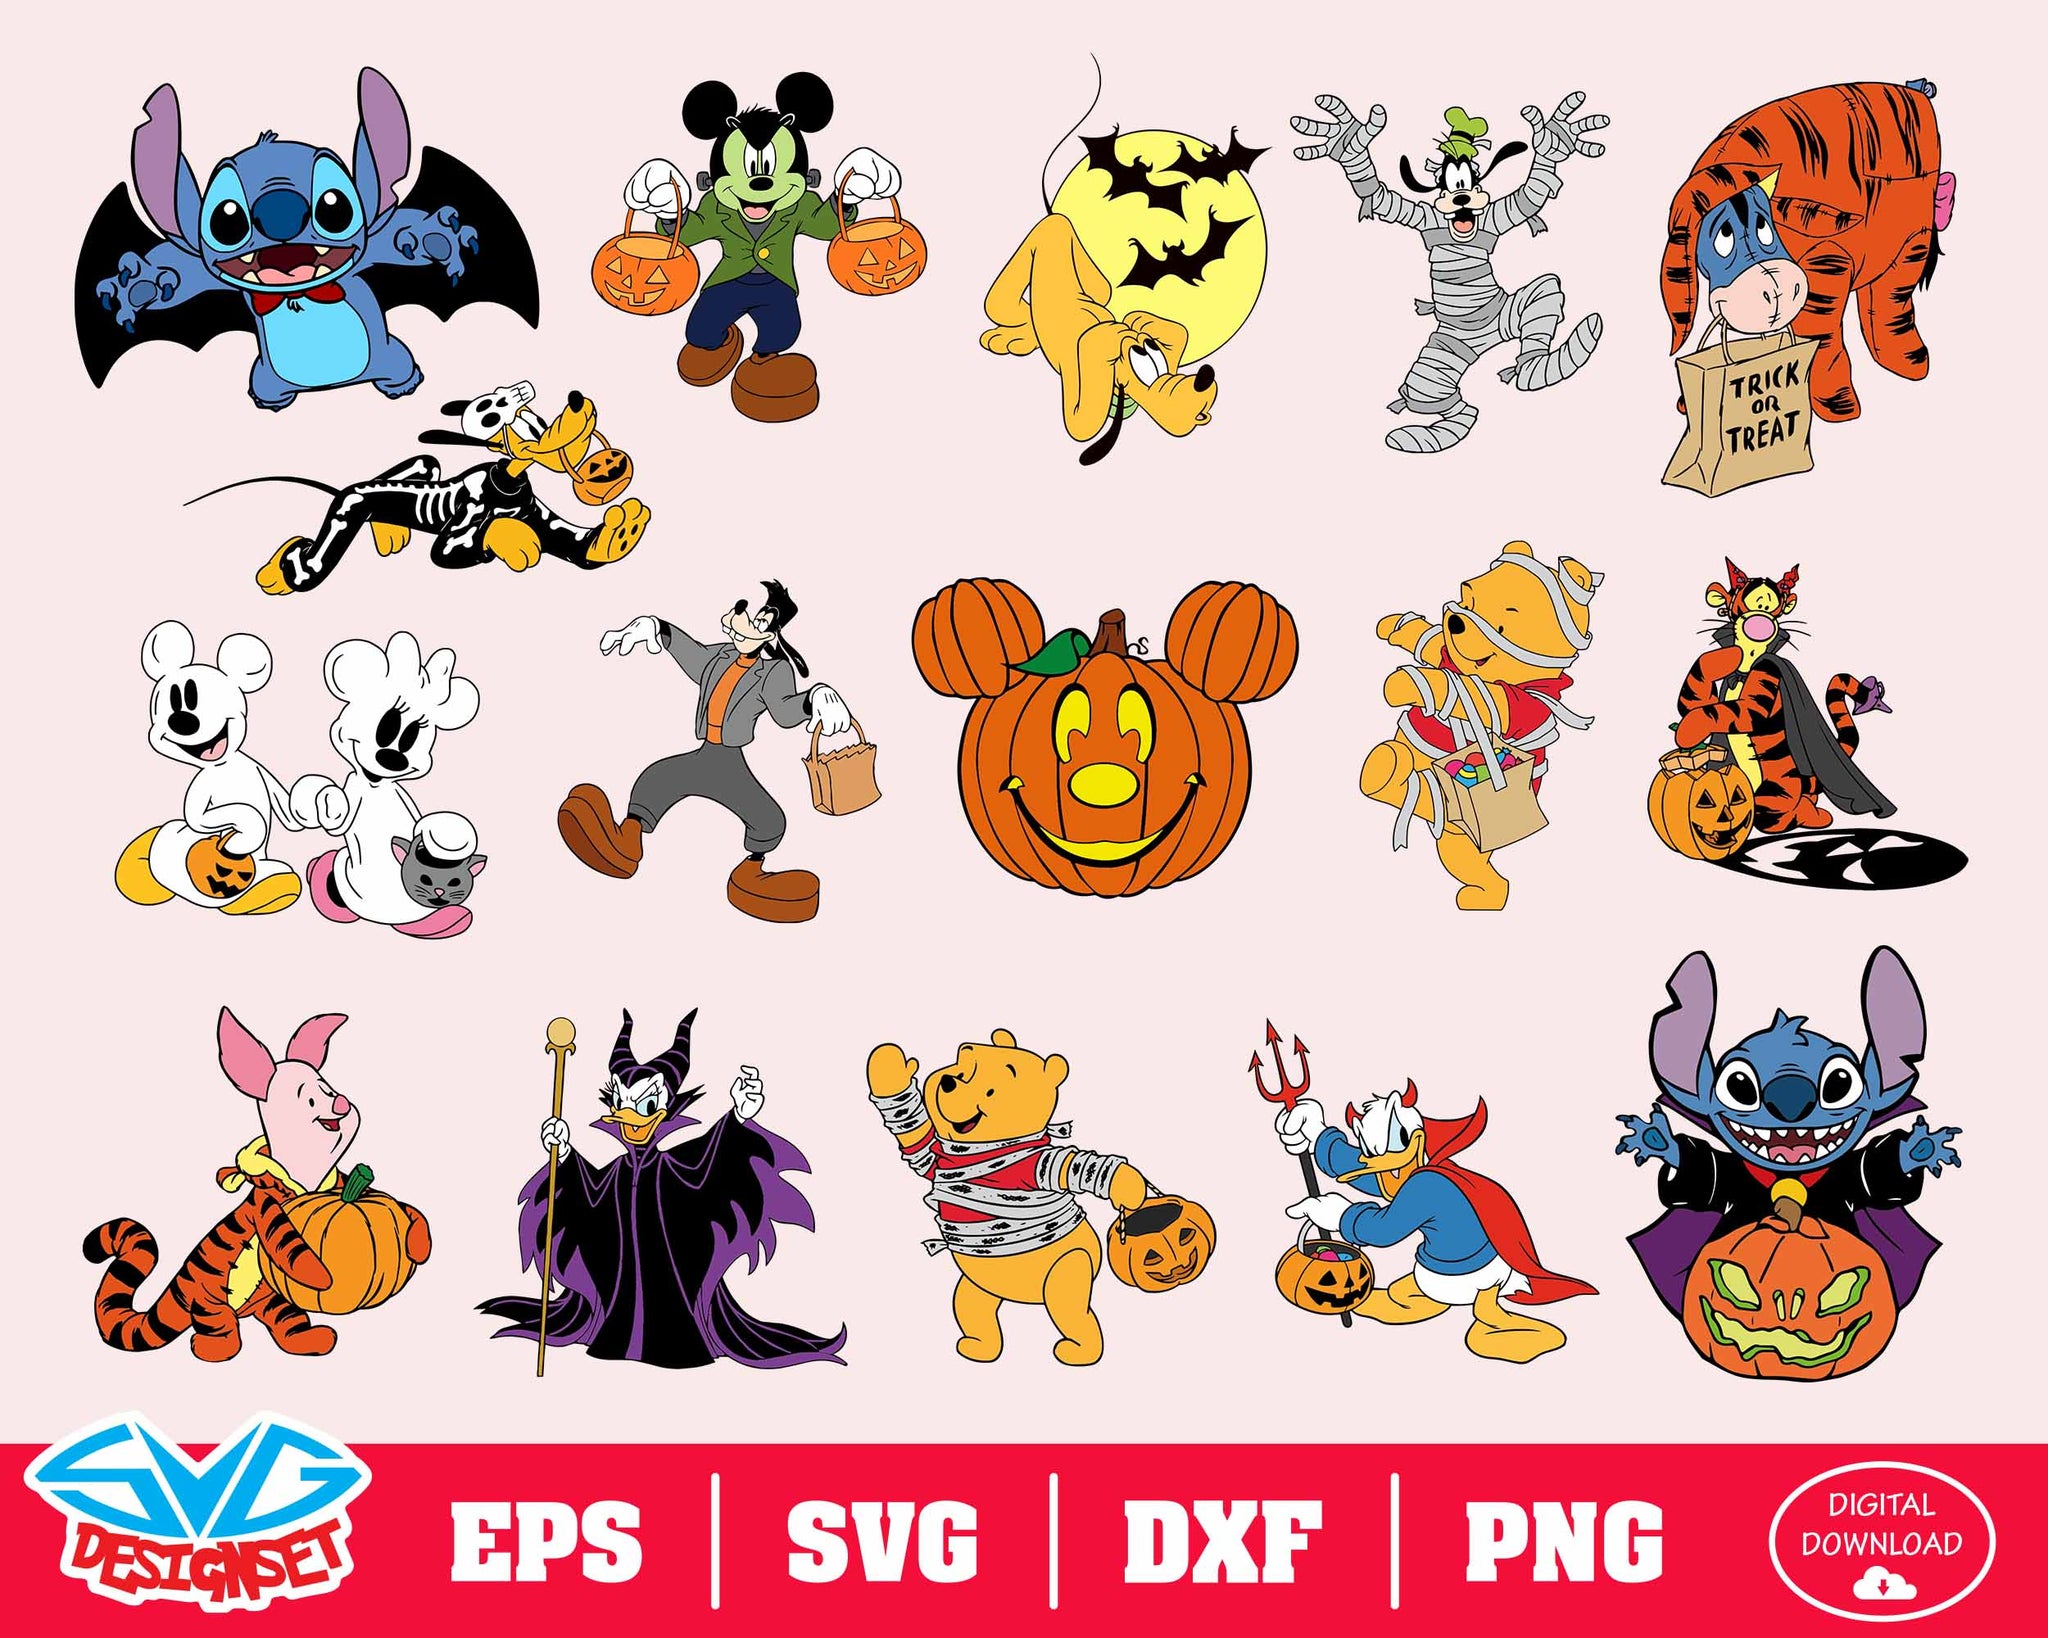 Disney Halloween Svg, Dxf, Eps, Png, Clipart, Silhouette and Cutfiles #3 - SVGDesignSets